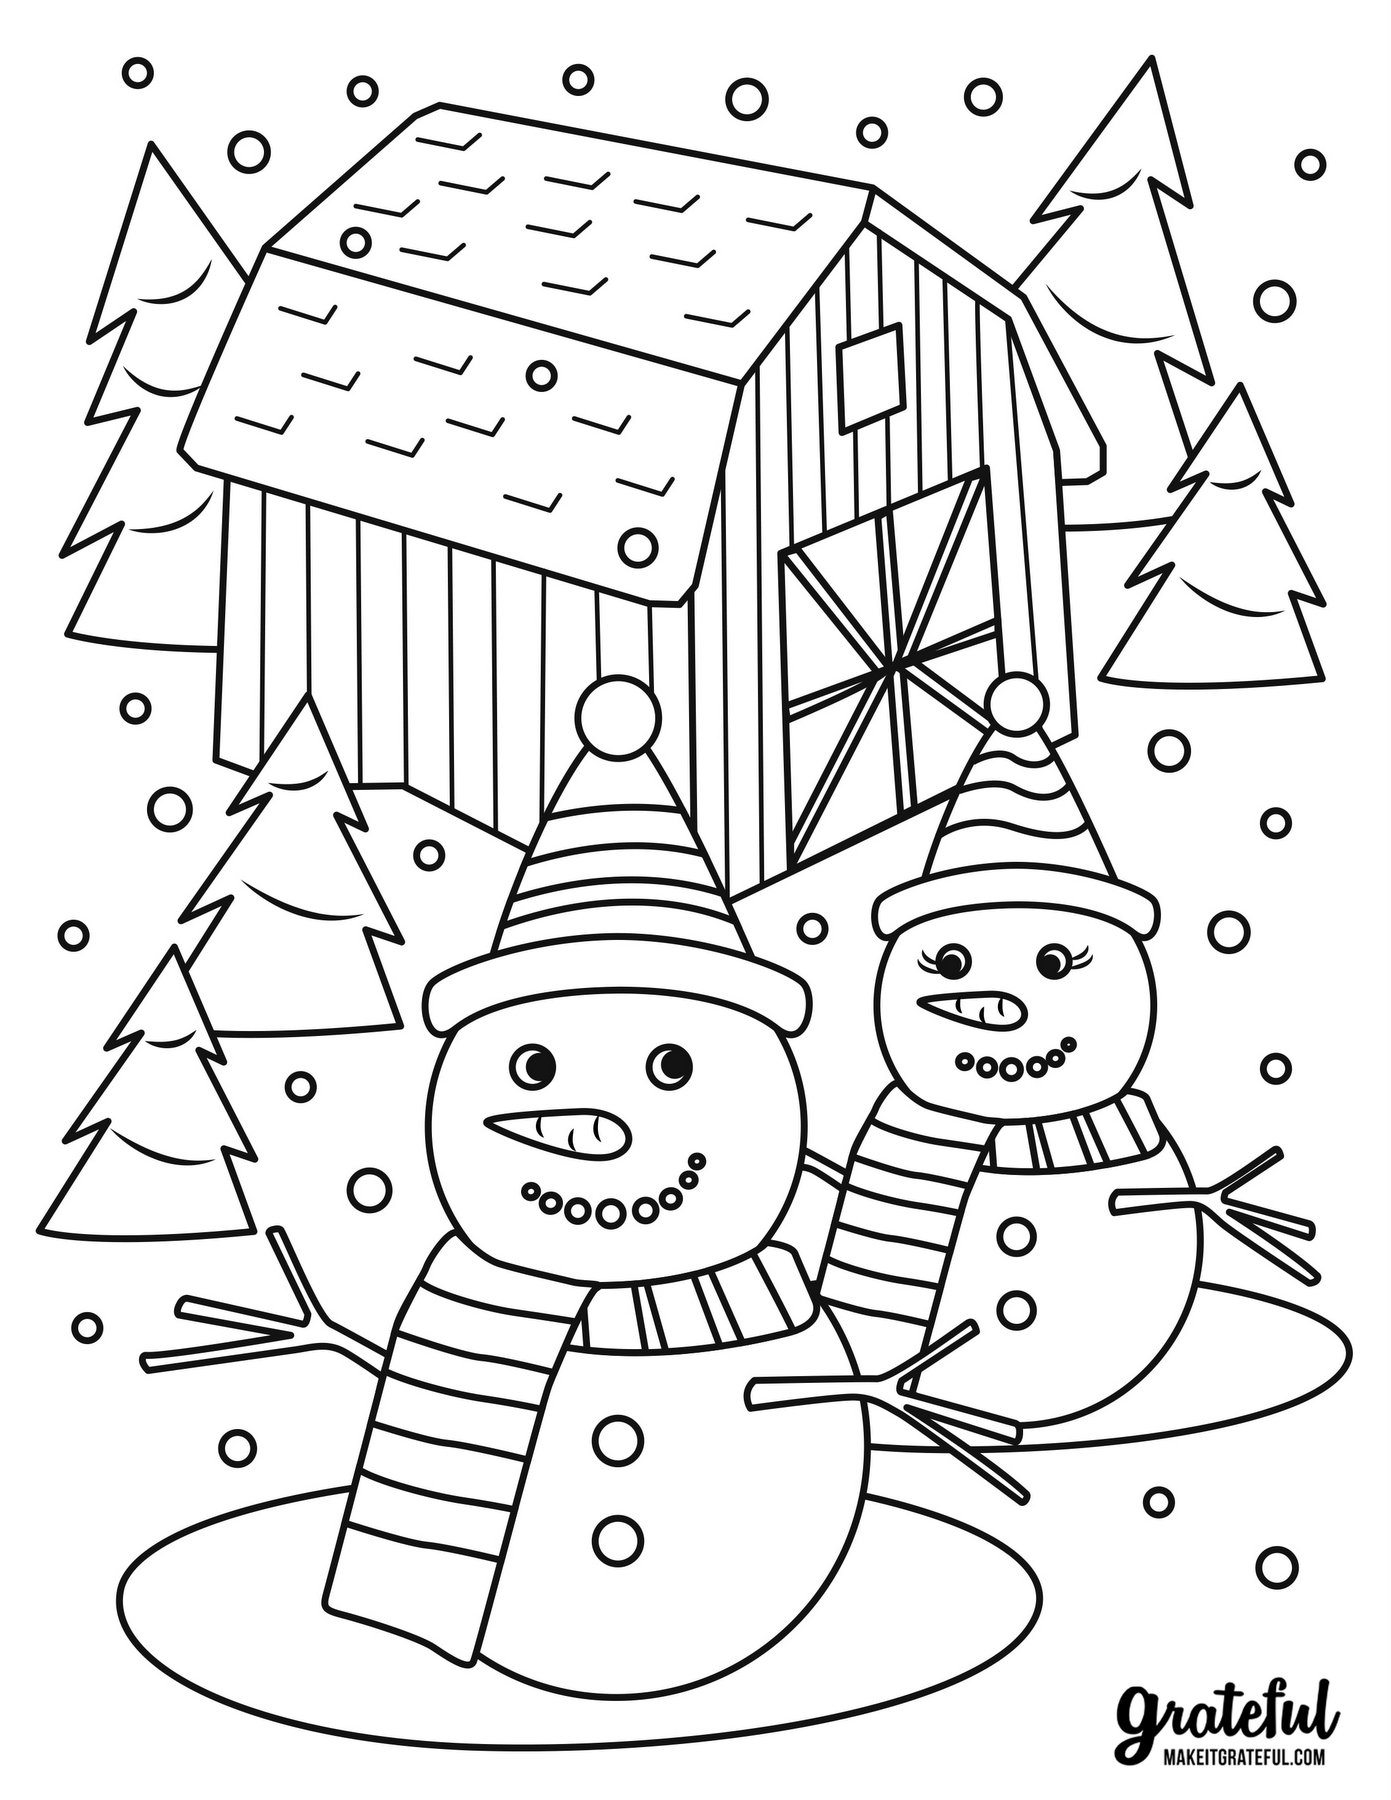 Mr. and Mrs. Snowman Coloring Page